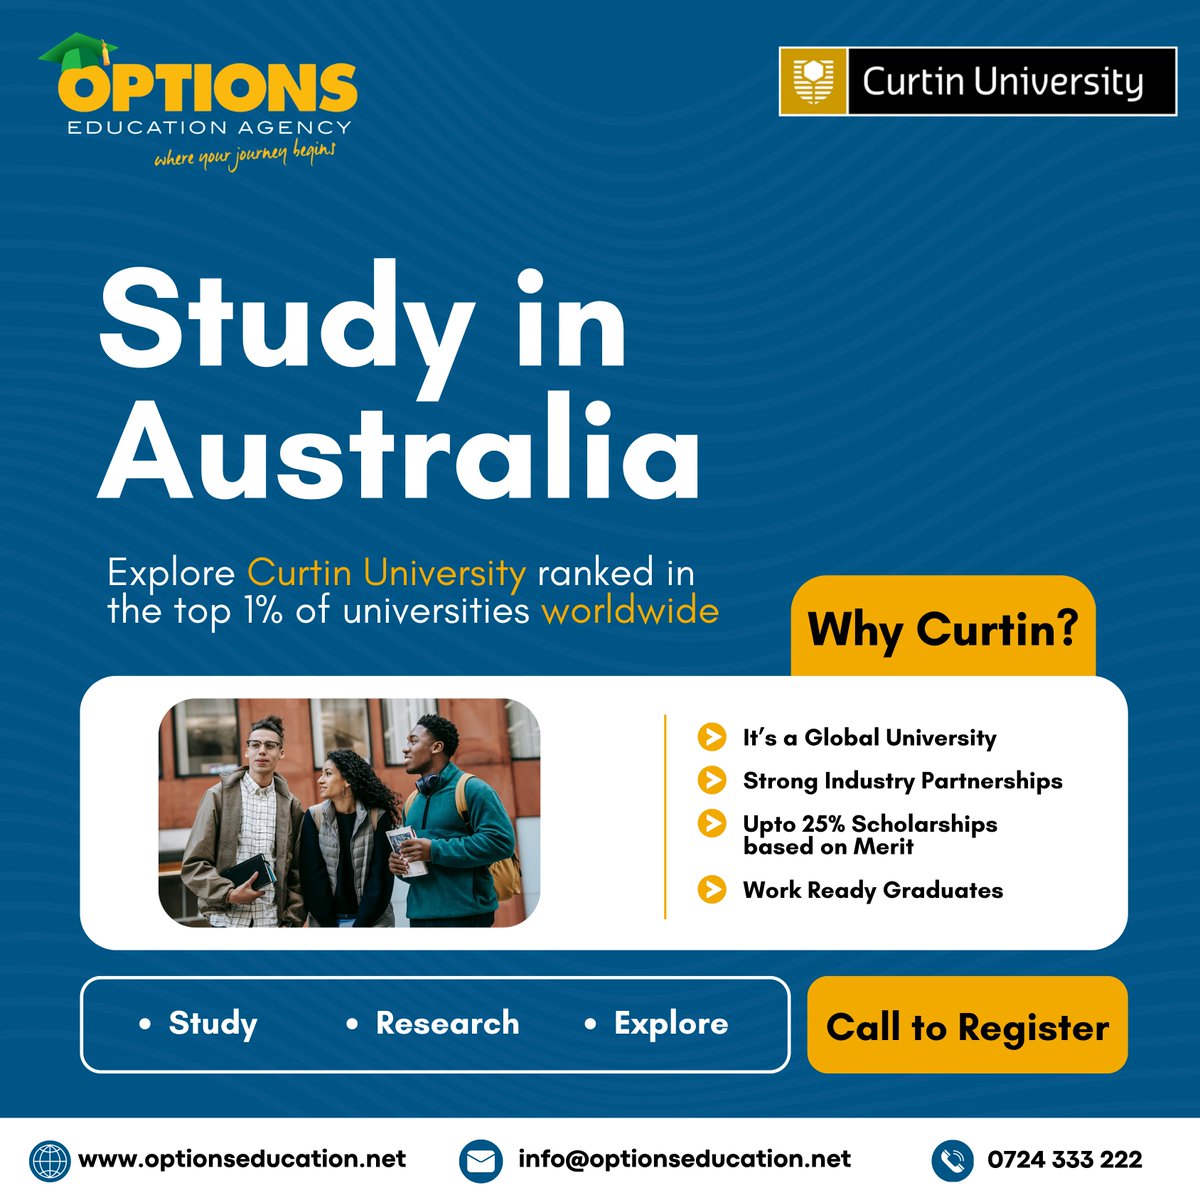 Join the Innovation Revolution at Curtin University! Explore our cutting-edge research, dynamic industry connections, and get ready for the careers of tomorrow. Call 0724 333 222 to get started. #studyabroad #studyinaustralia